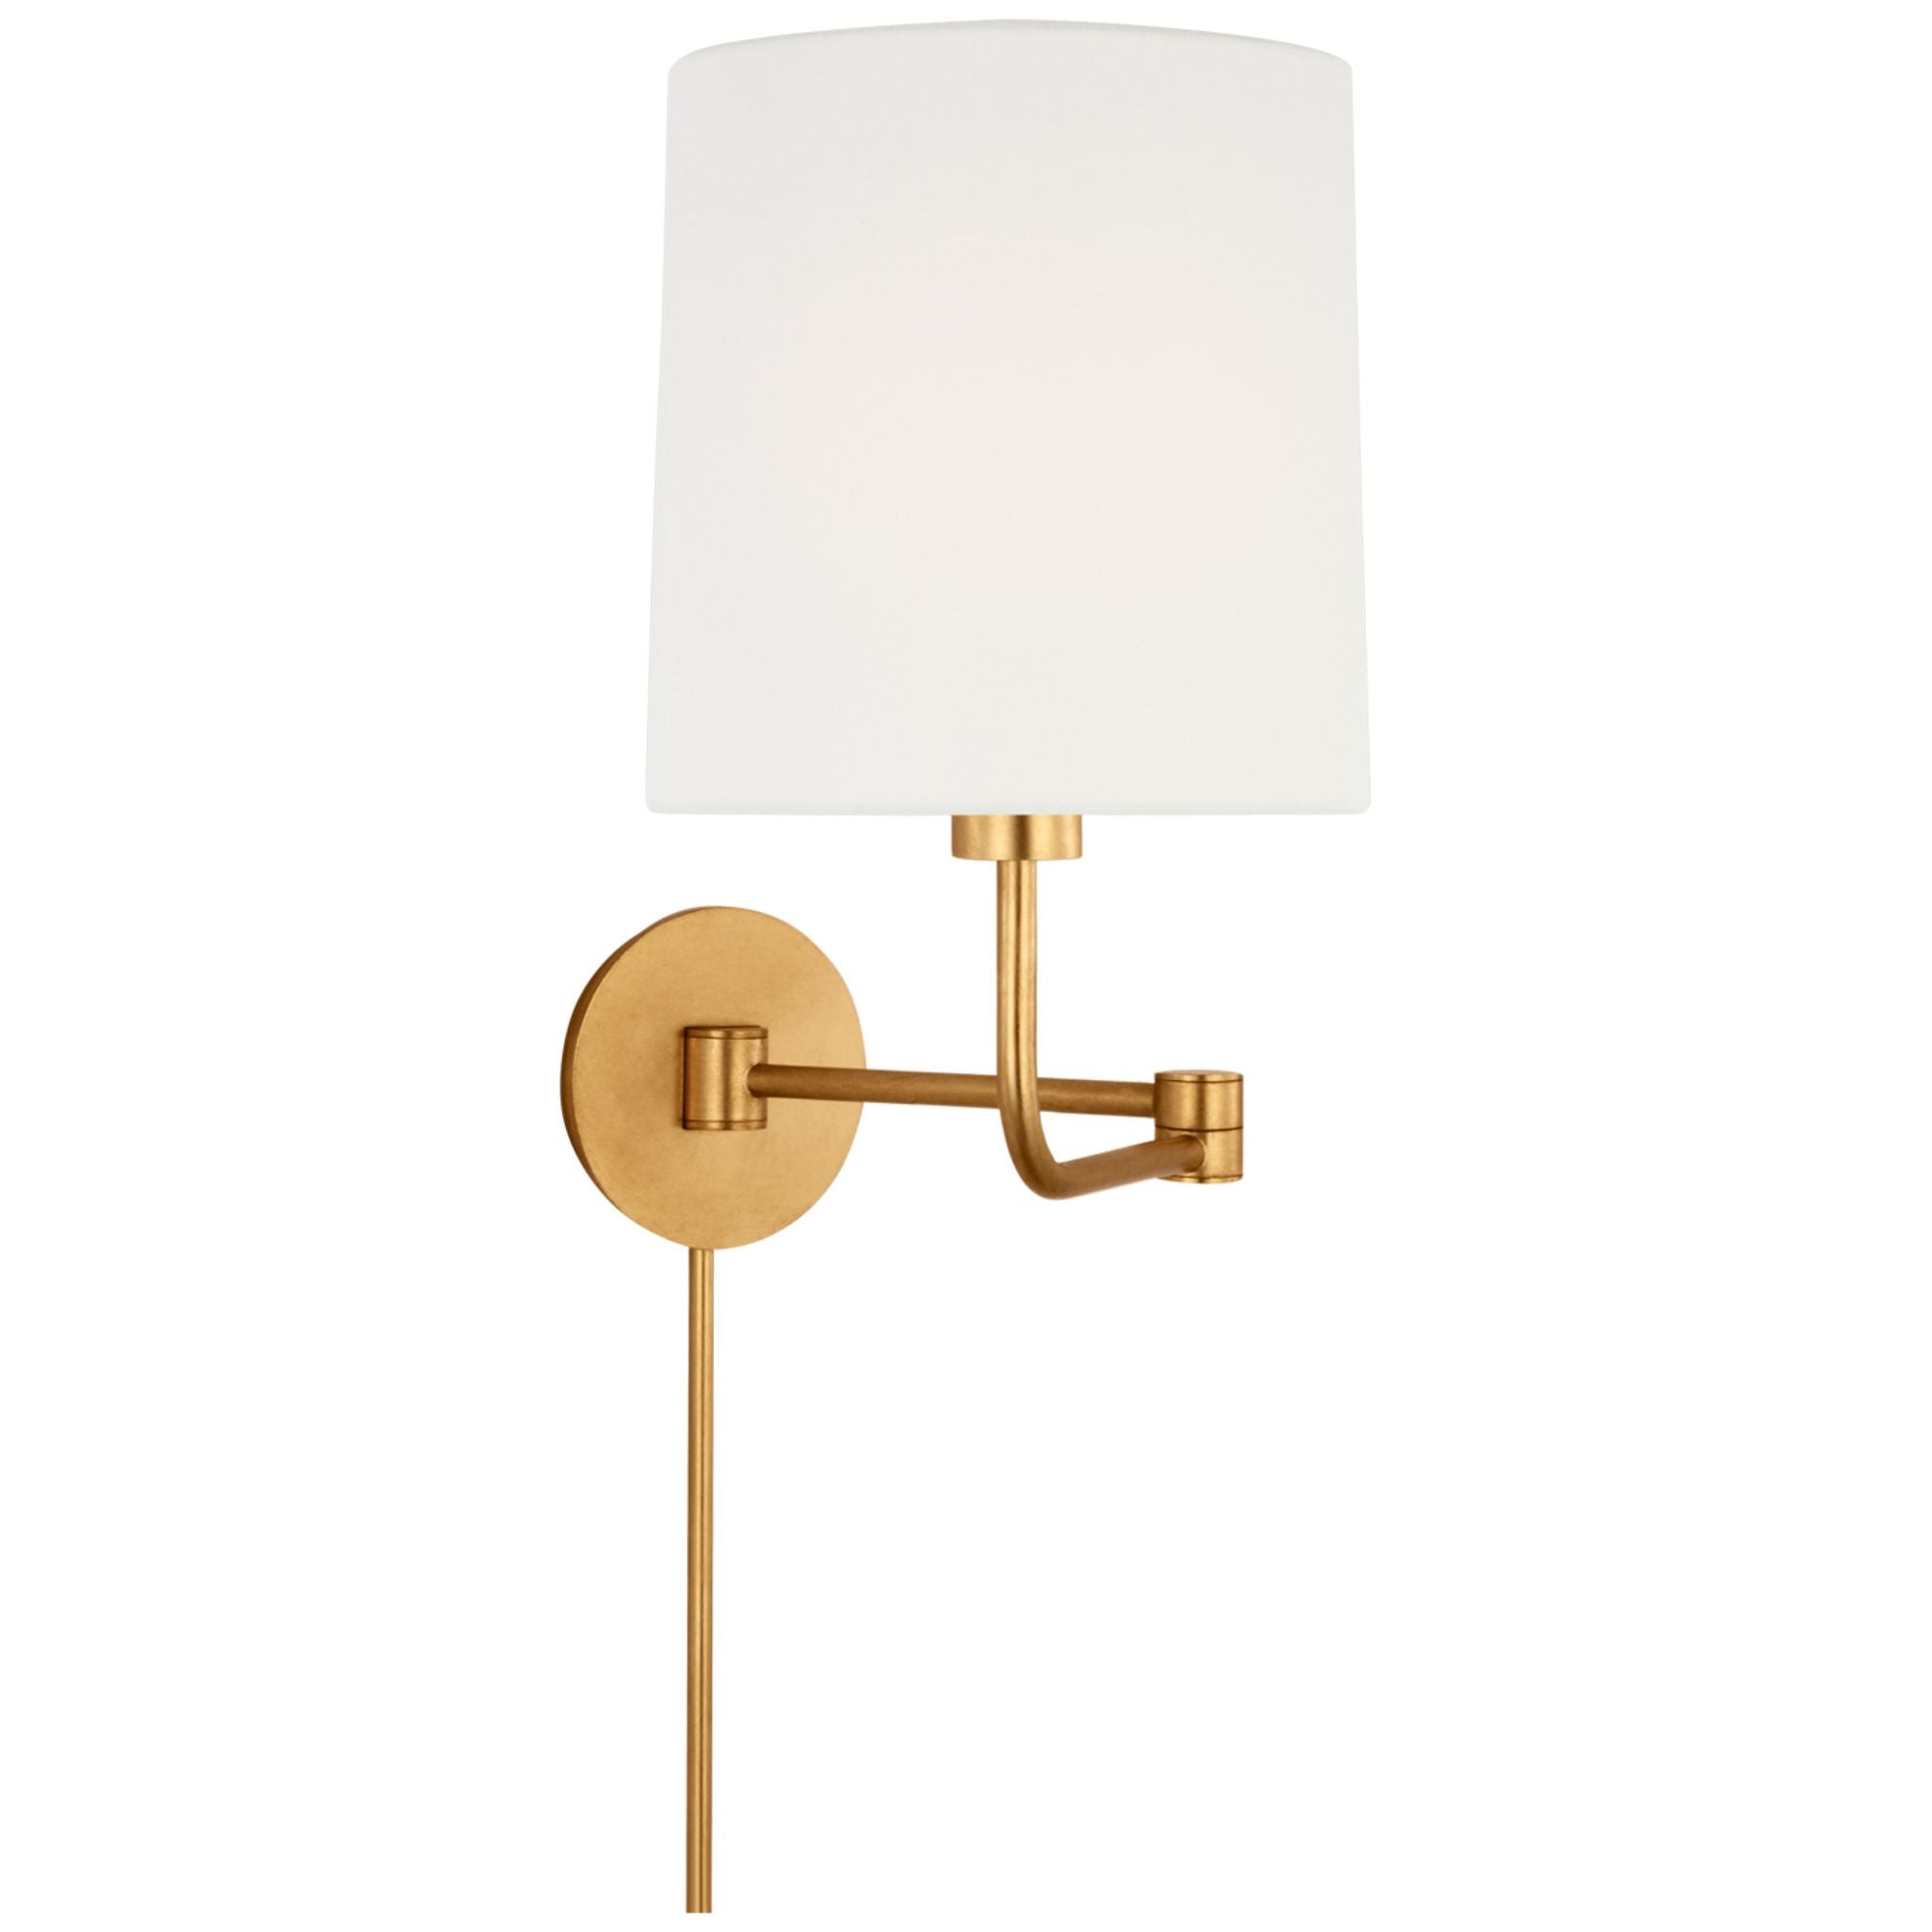 Barbara Barry Go Lightly Swing Arm Wall Light in Gild with Linen Shade